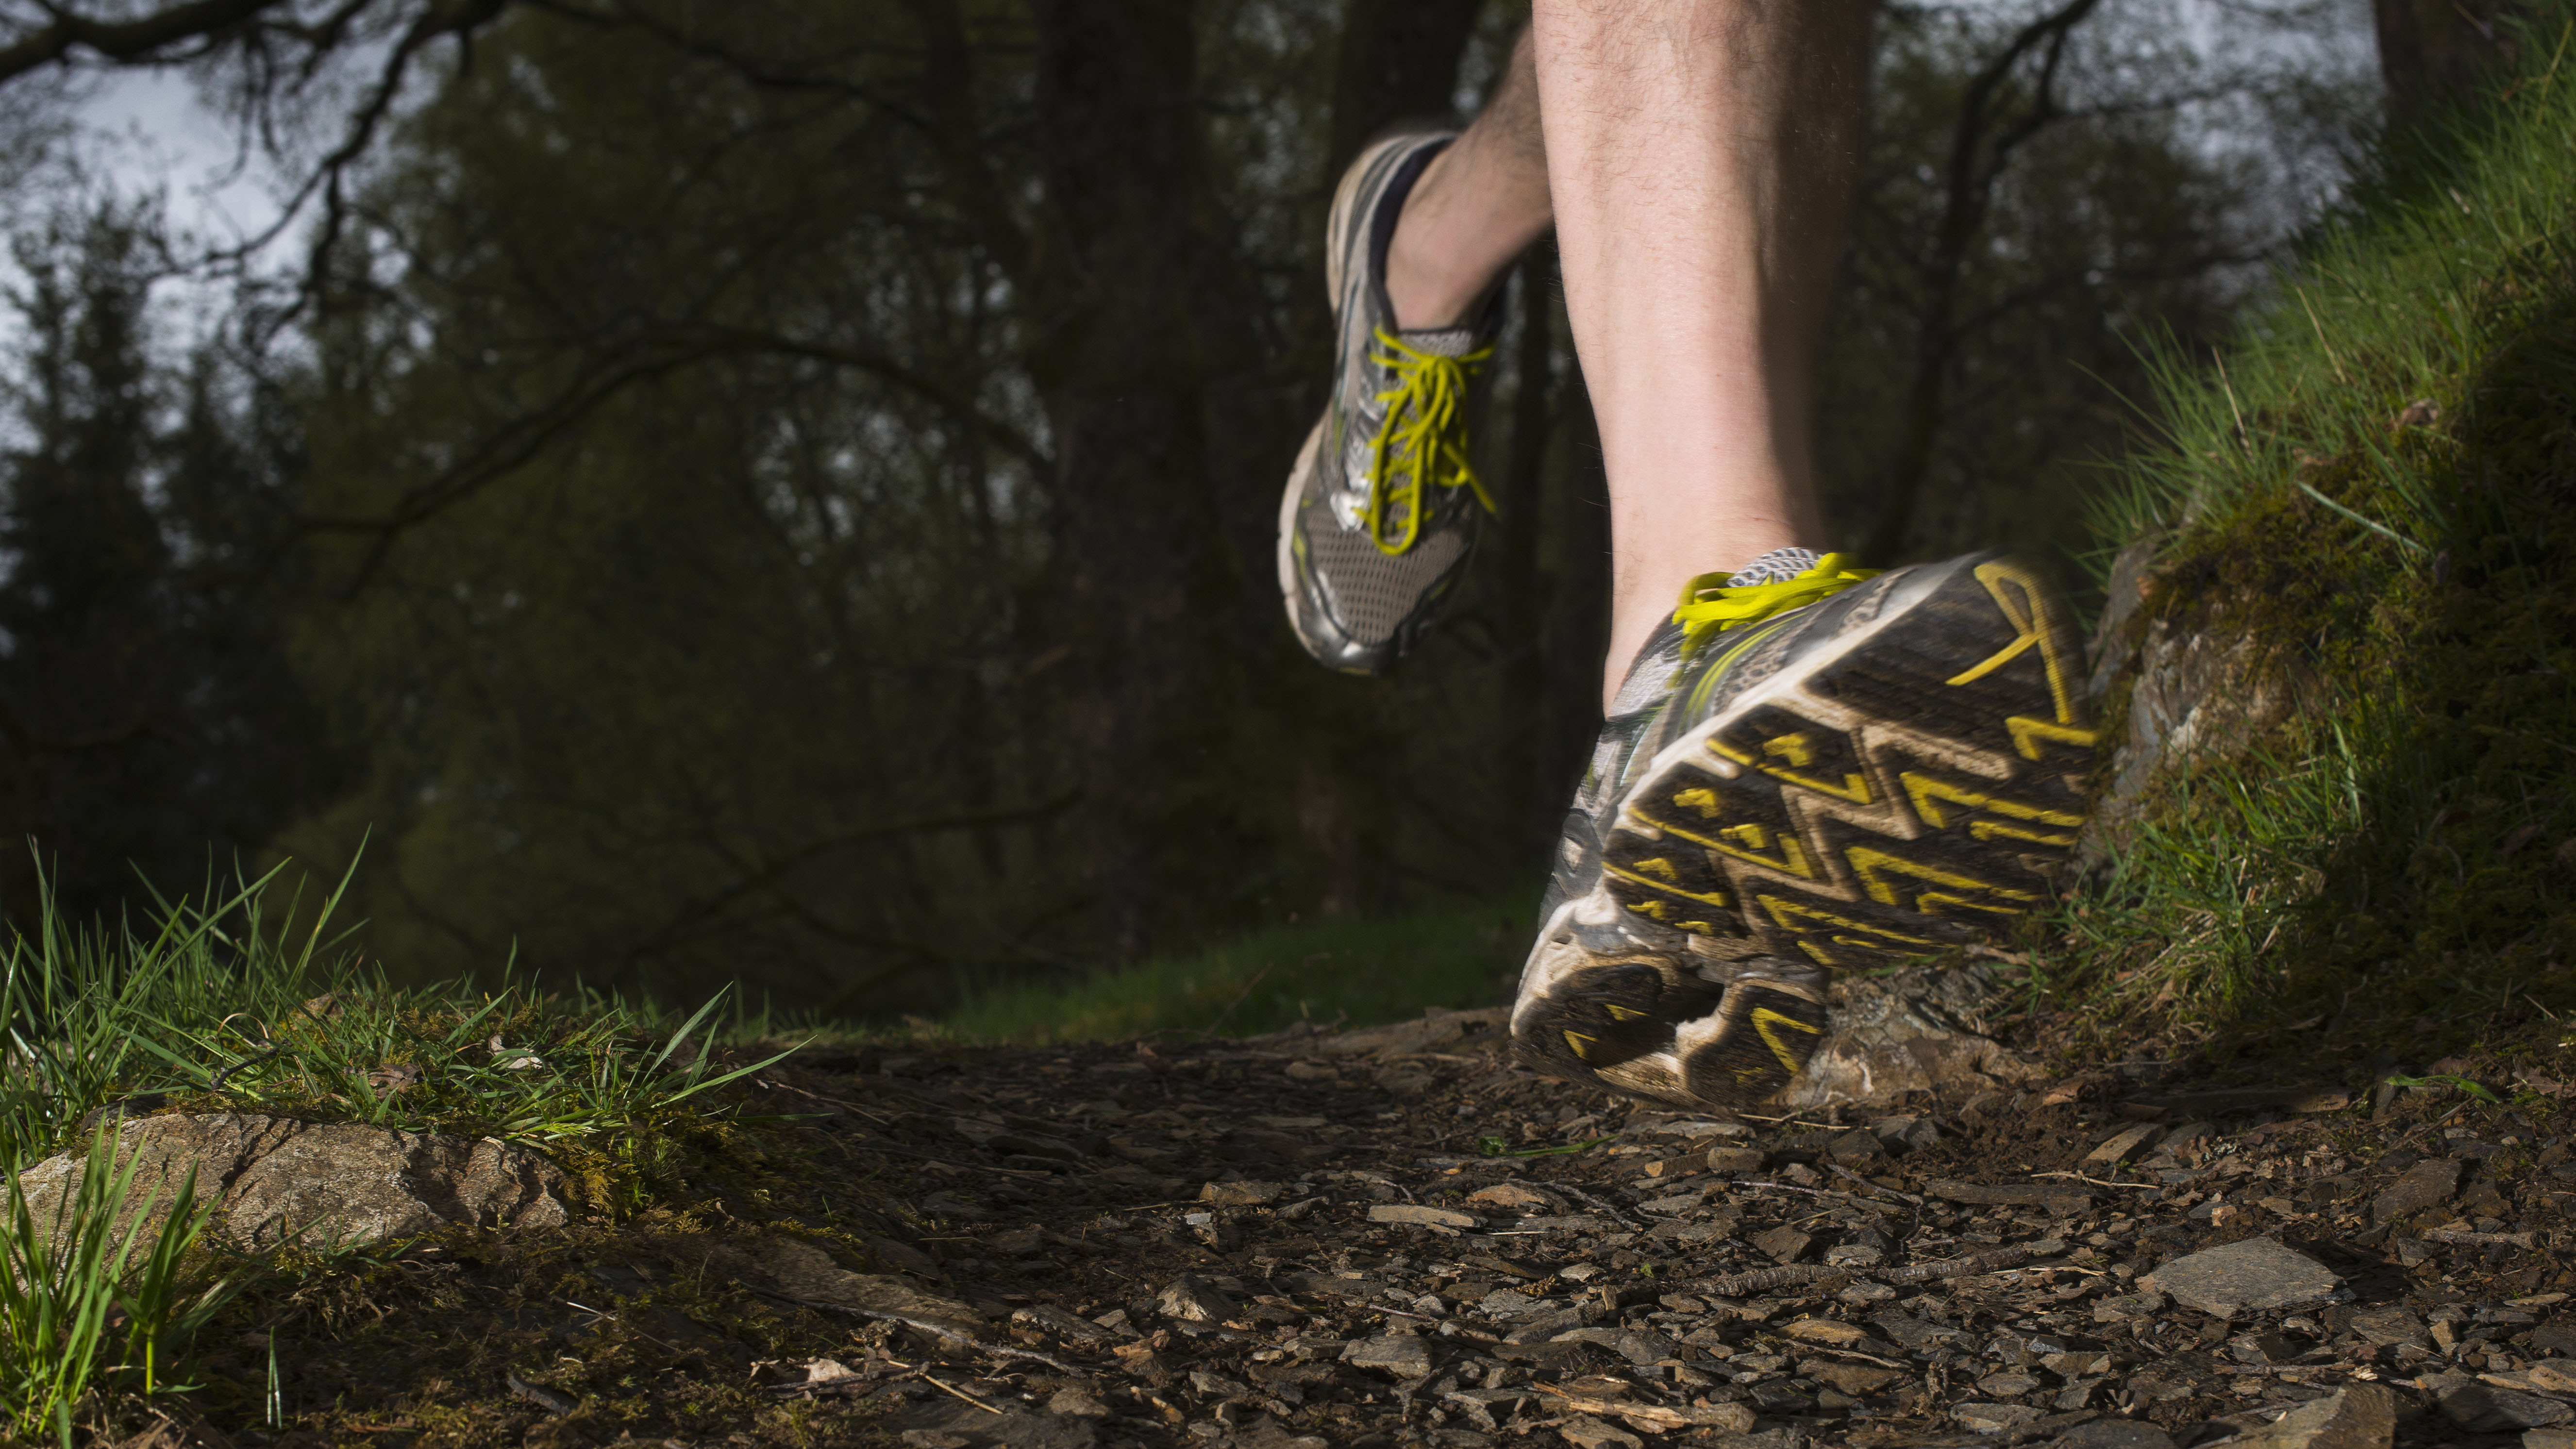 Close up on man's running shoes; background shows forest trail